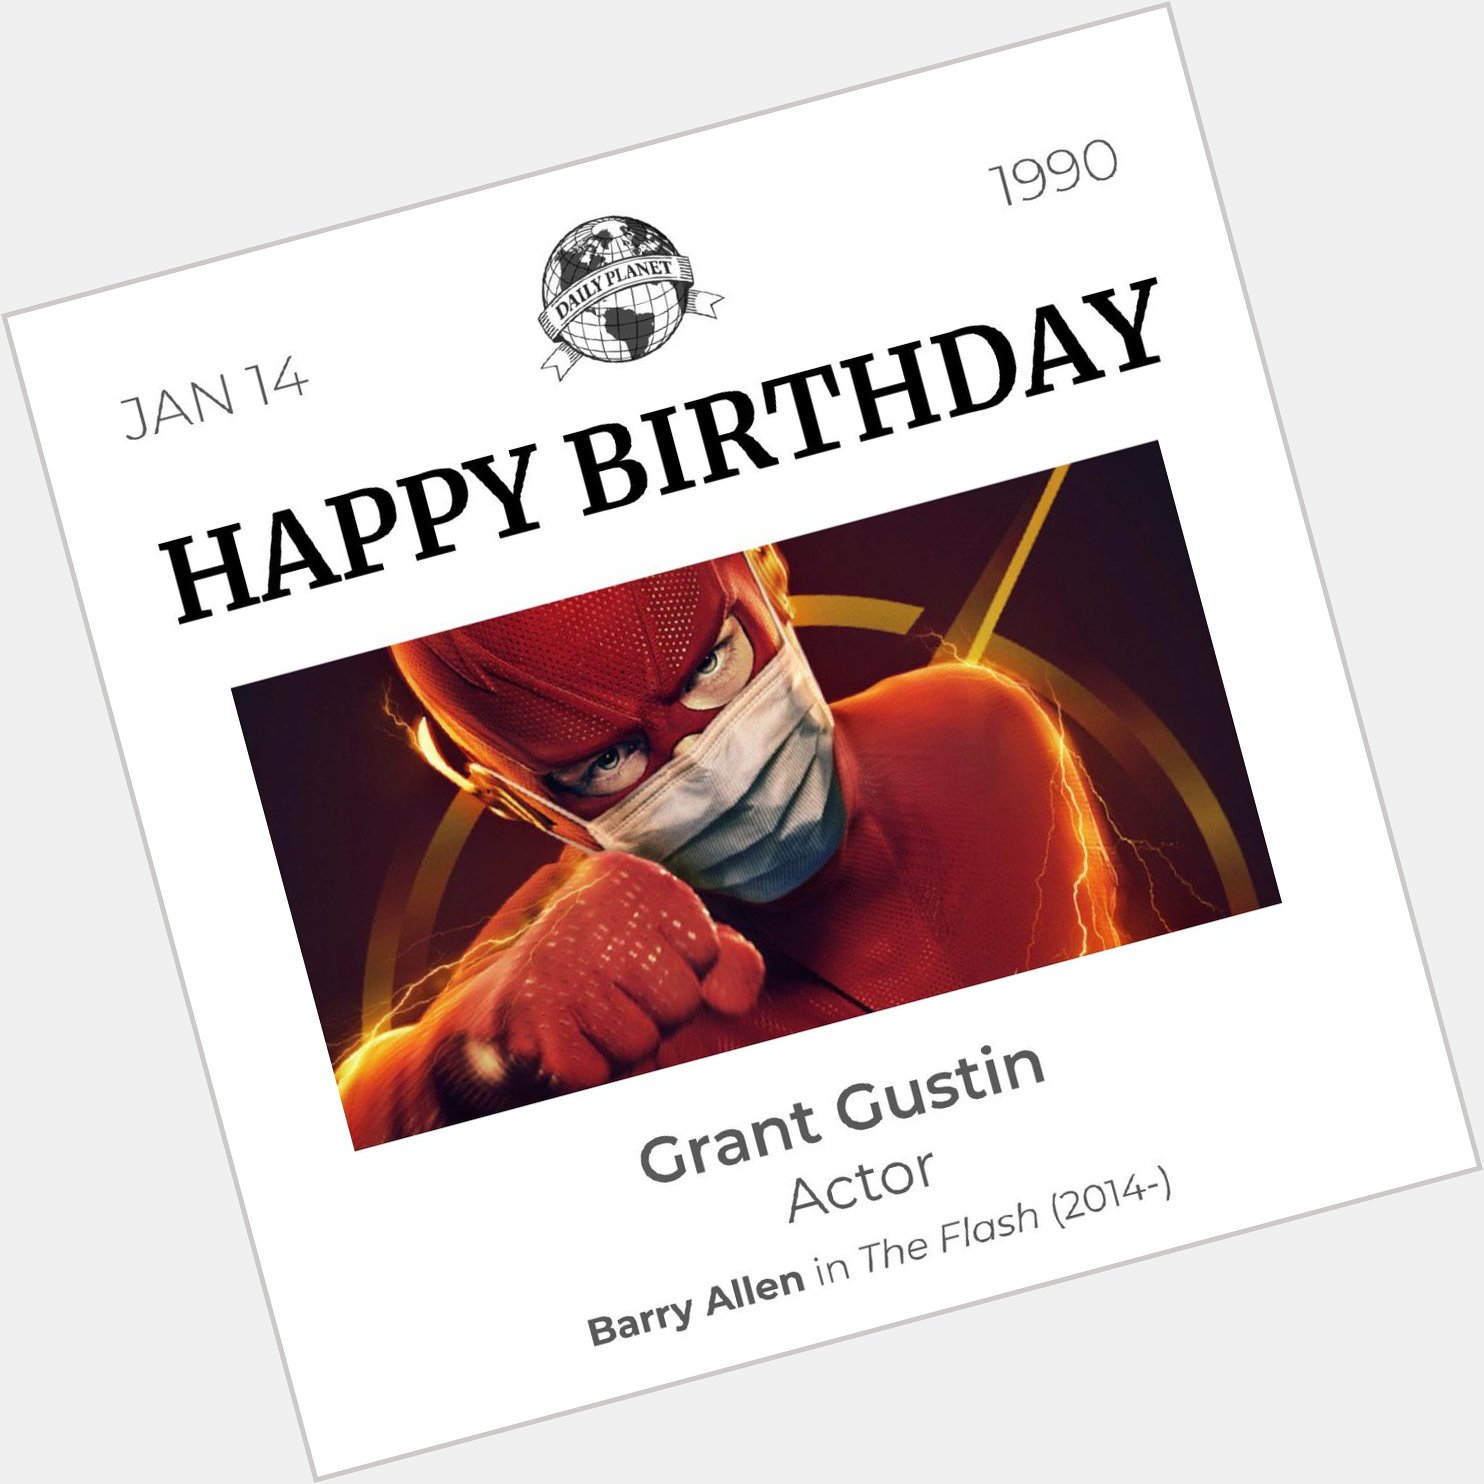 Happy birthday to actor (Barry Allen himself), Grant Gustin!  